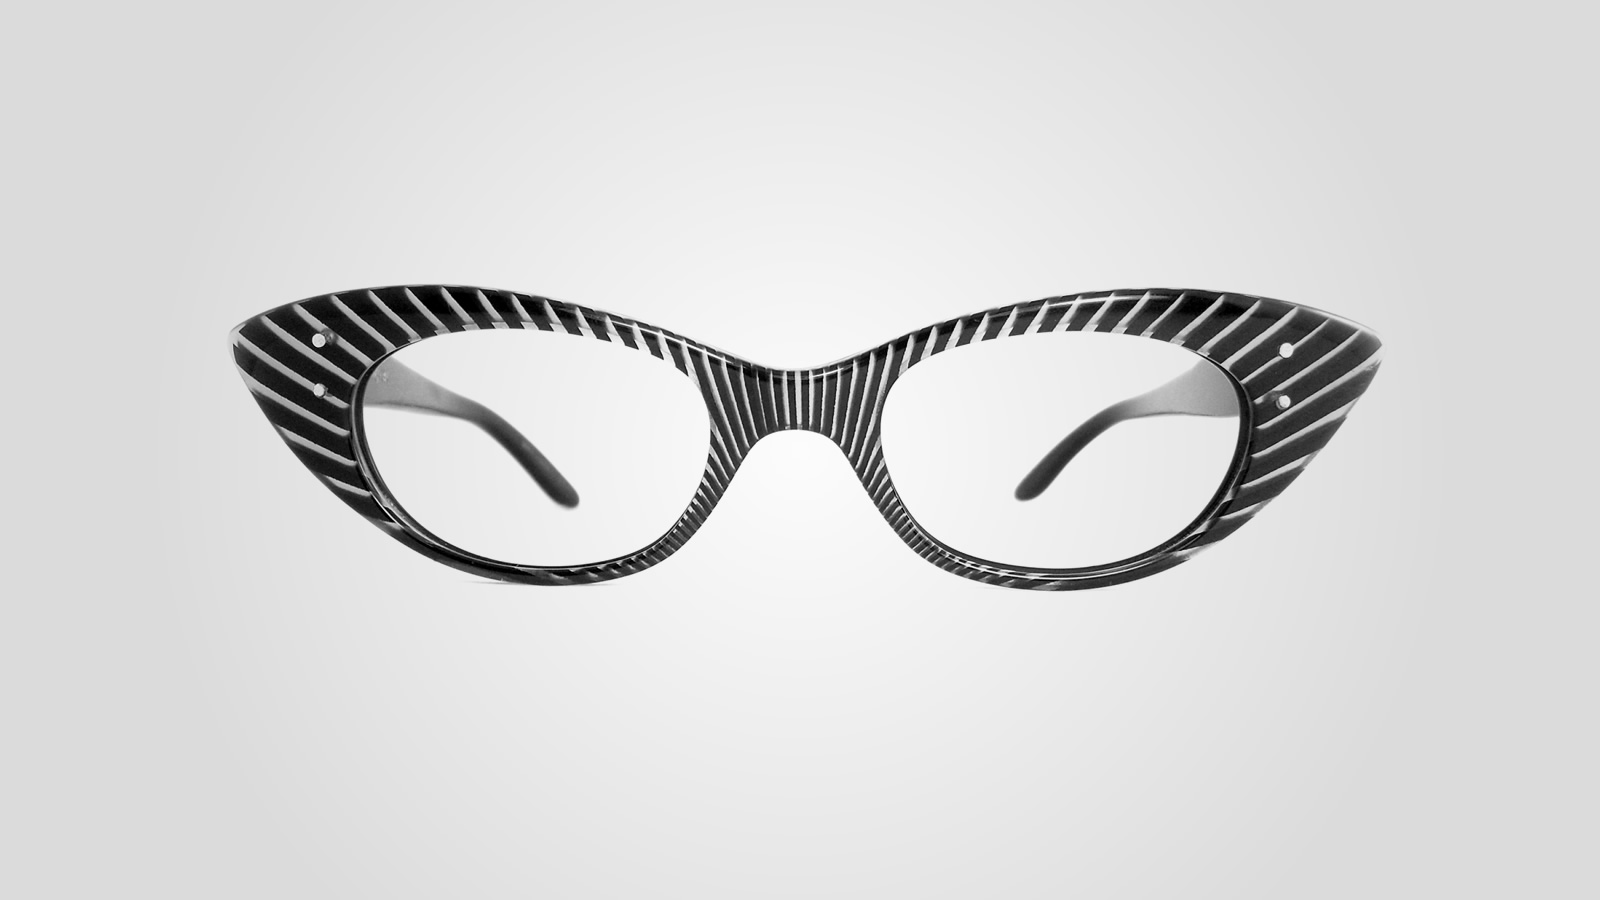 A pair of spectacles, in a style popular amongst women in the 1960s